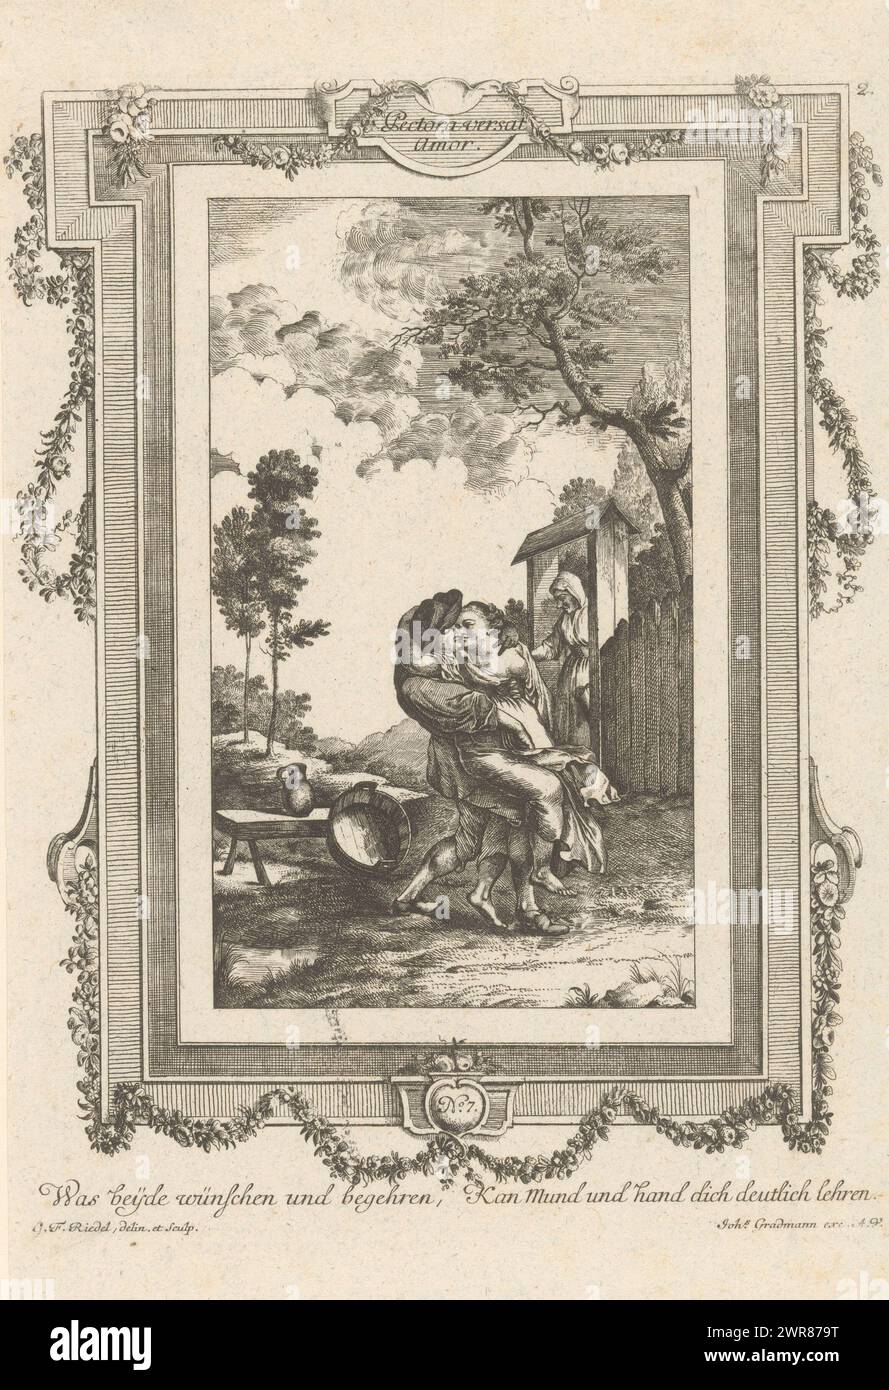 Couple in love kissing and caressing, Pectora versat Amor (title on object), Pastoral love scenes (series title), A couple in love kisses and caresses each other in the open air. On the right, an old woman with a jug walks through a wooden gate. A frame with garlands surrounds the scene. German text in the bottom margin. Publisher number 7., print maker: Gottlieb Friedrich Riedel, after own design by: Gottlieb Friedrich Riedel, publisher: Johann Gradmann, Augsburg, 1778 - 1779, paper, etching, height 231 mm, width 175 mm, print Stock Photo